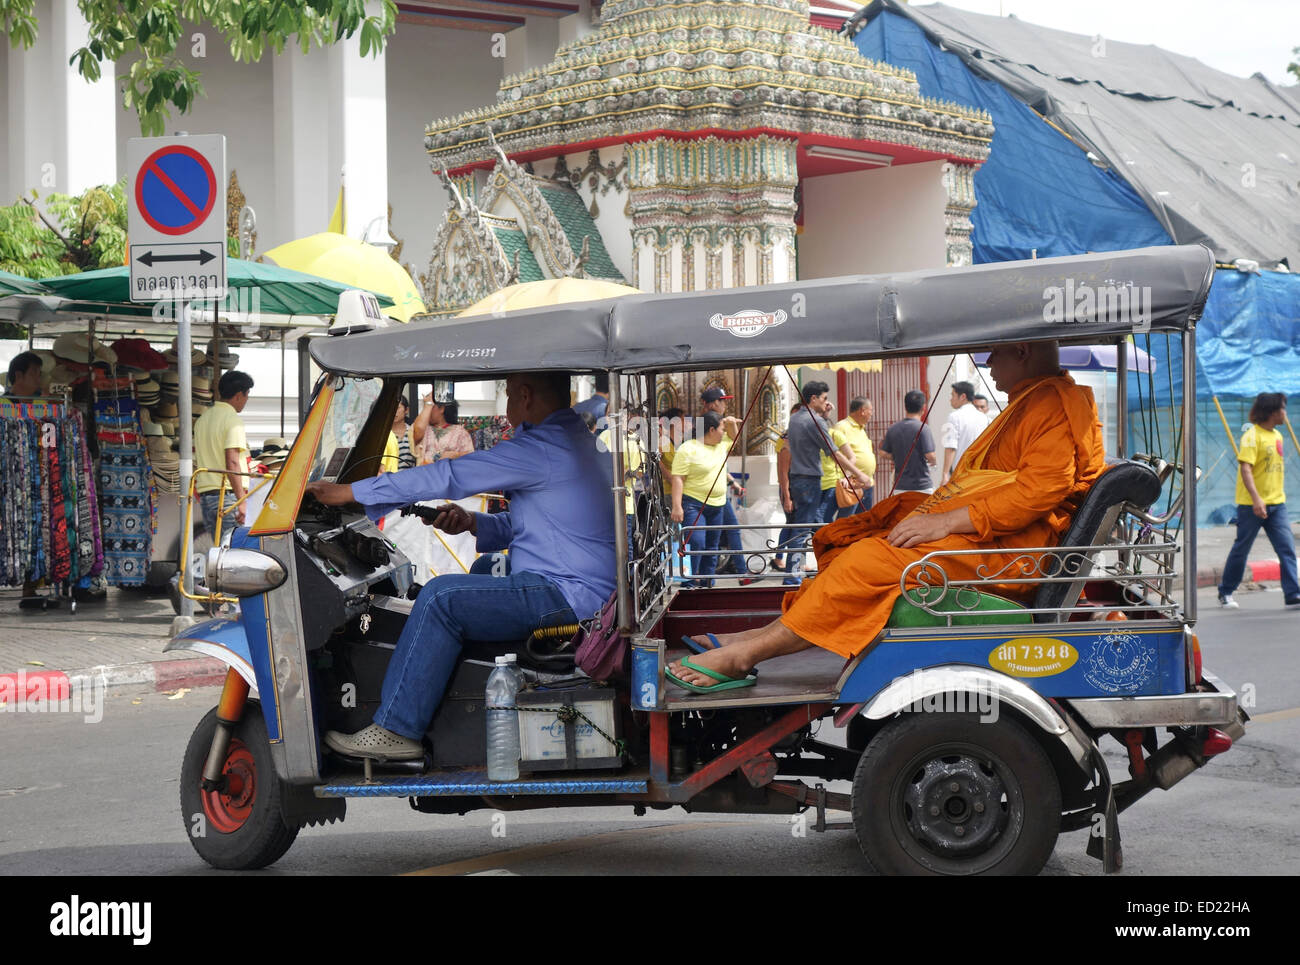 Tuk-tuk with buddhist monk passing by in a street in Bangkok, Thailand, Southeast Asia. Stock Photo